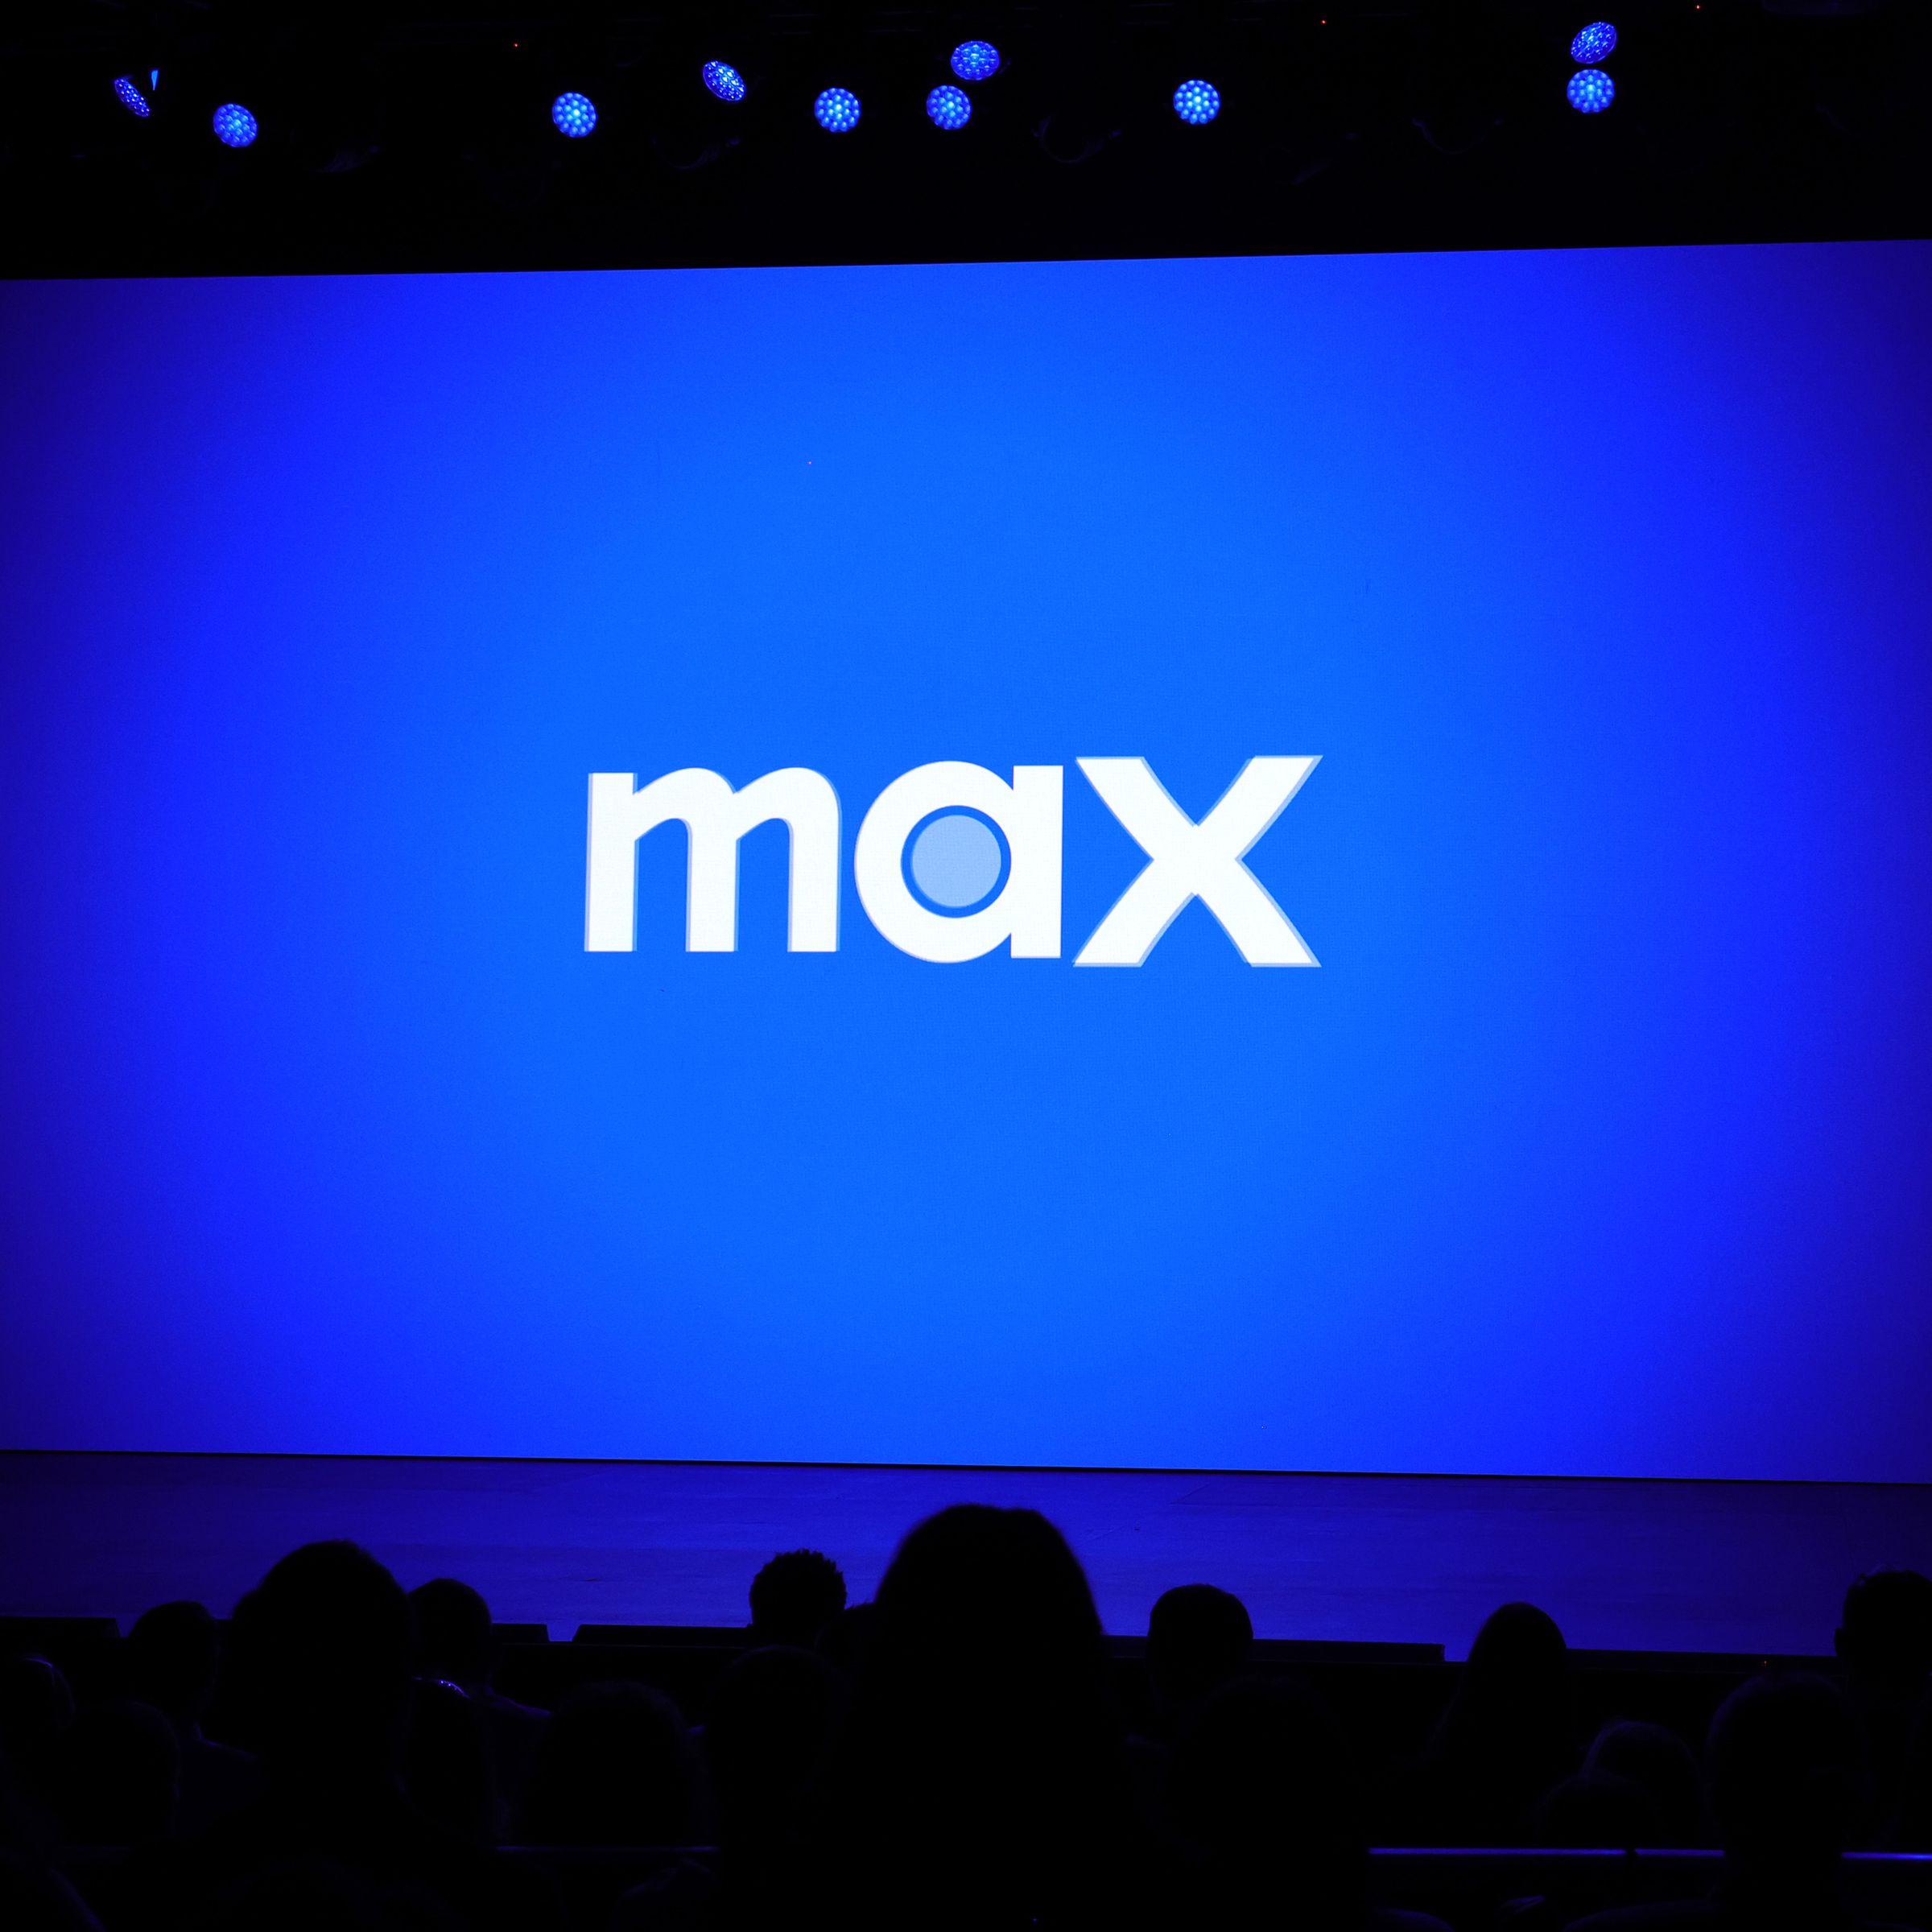 The Max logo being displayed on a massive screen before an audience.